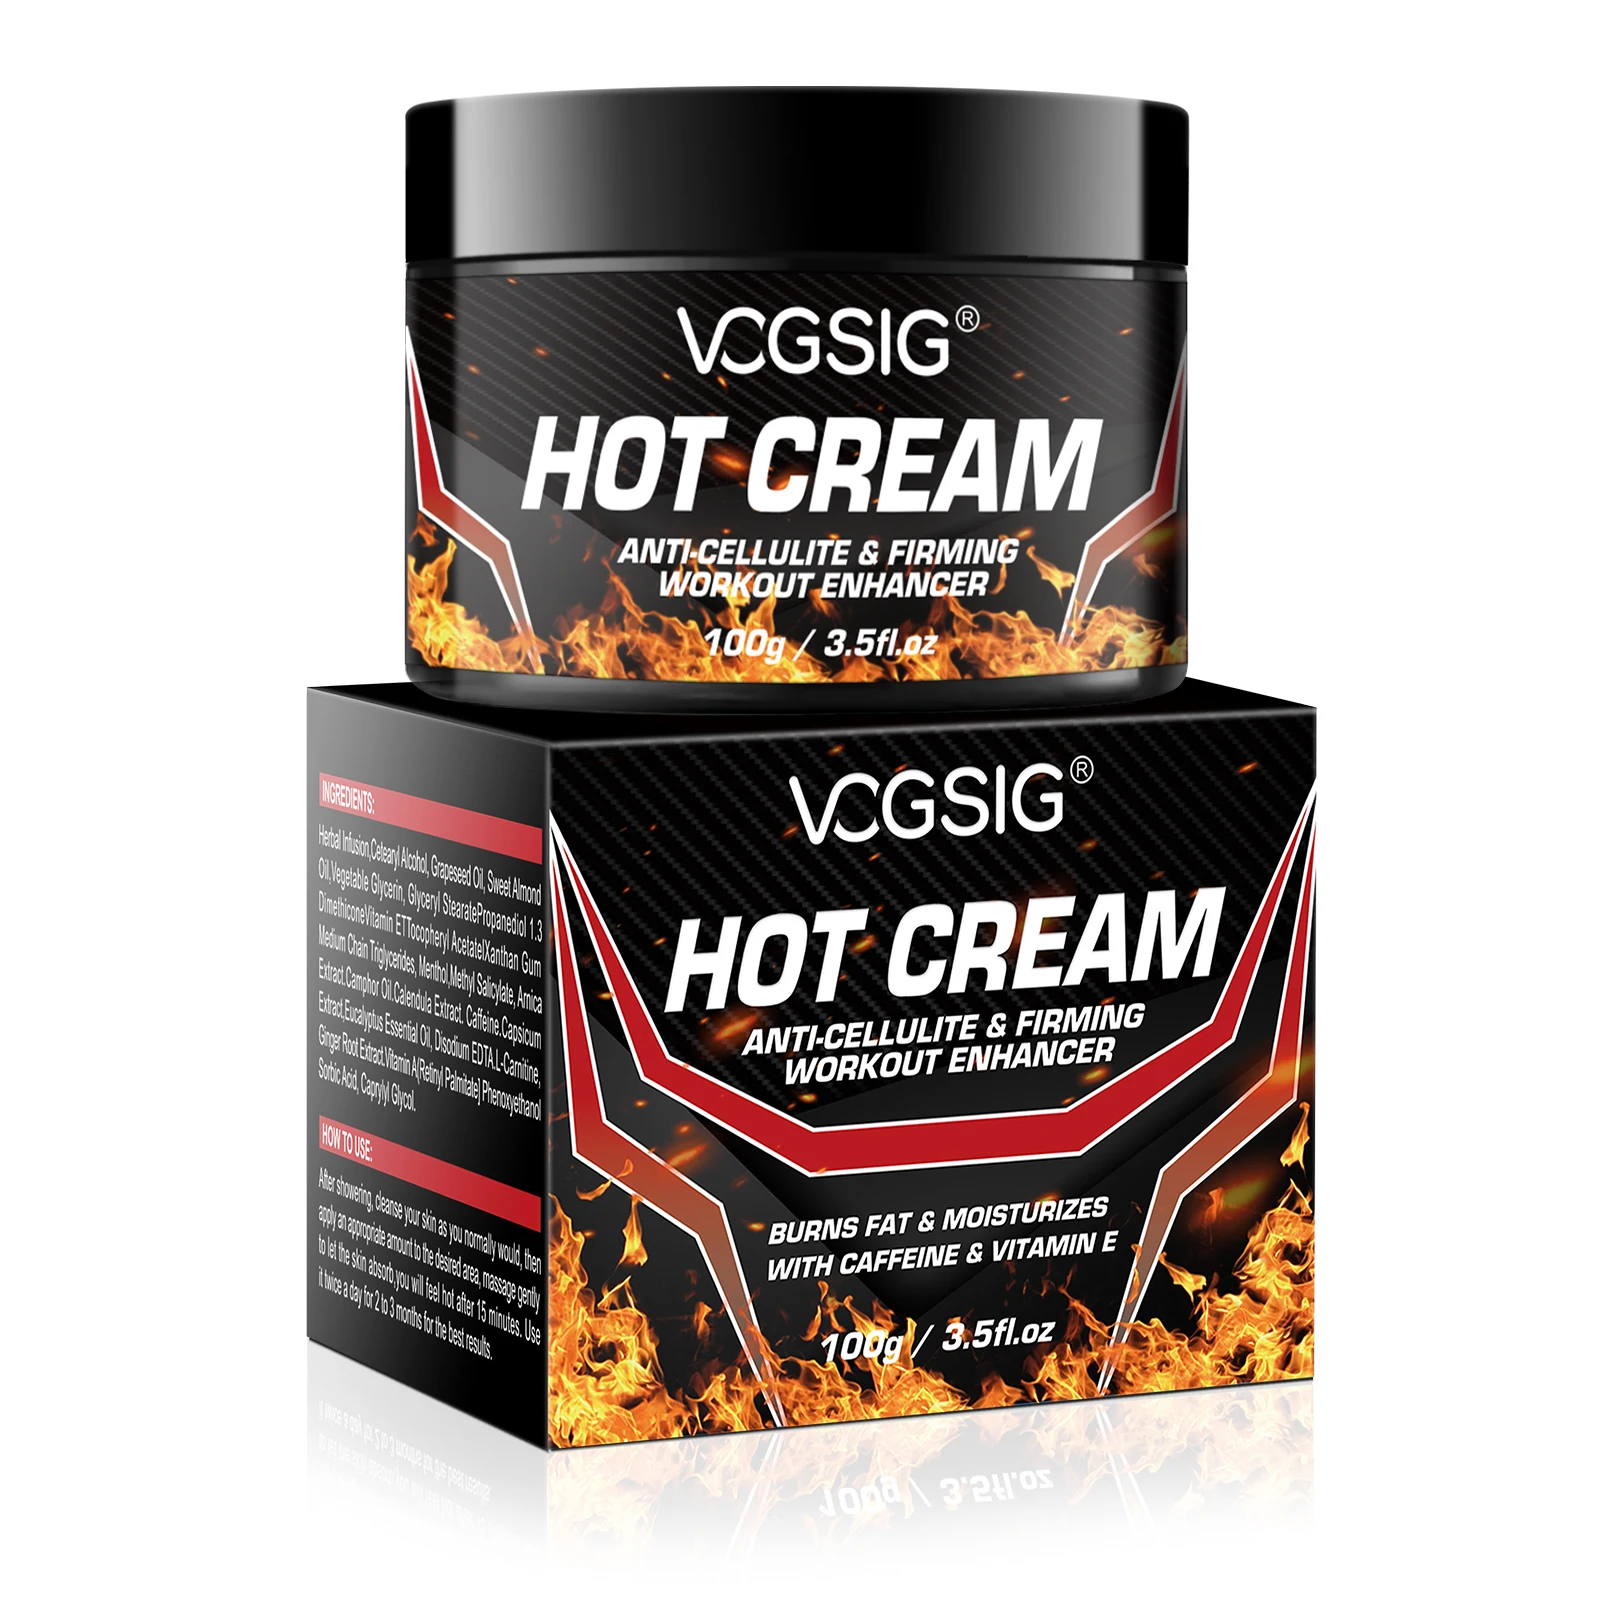 

VOGSIG Weight Loss Hot Cream Cellulite And Muscle Pain Relief Enlargement Cream